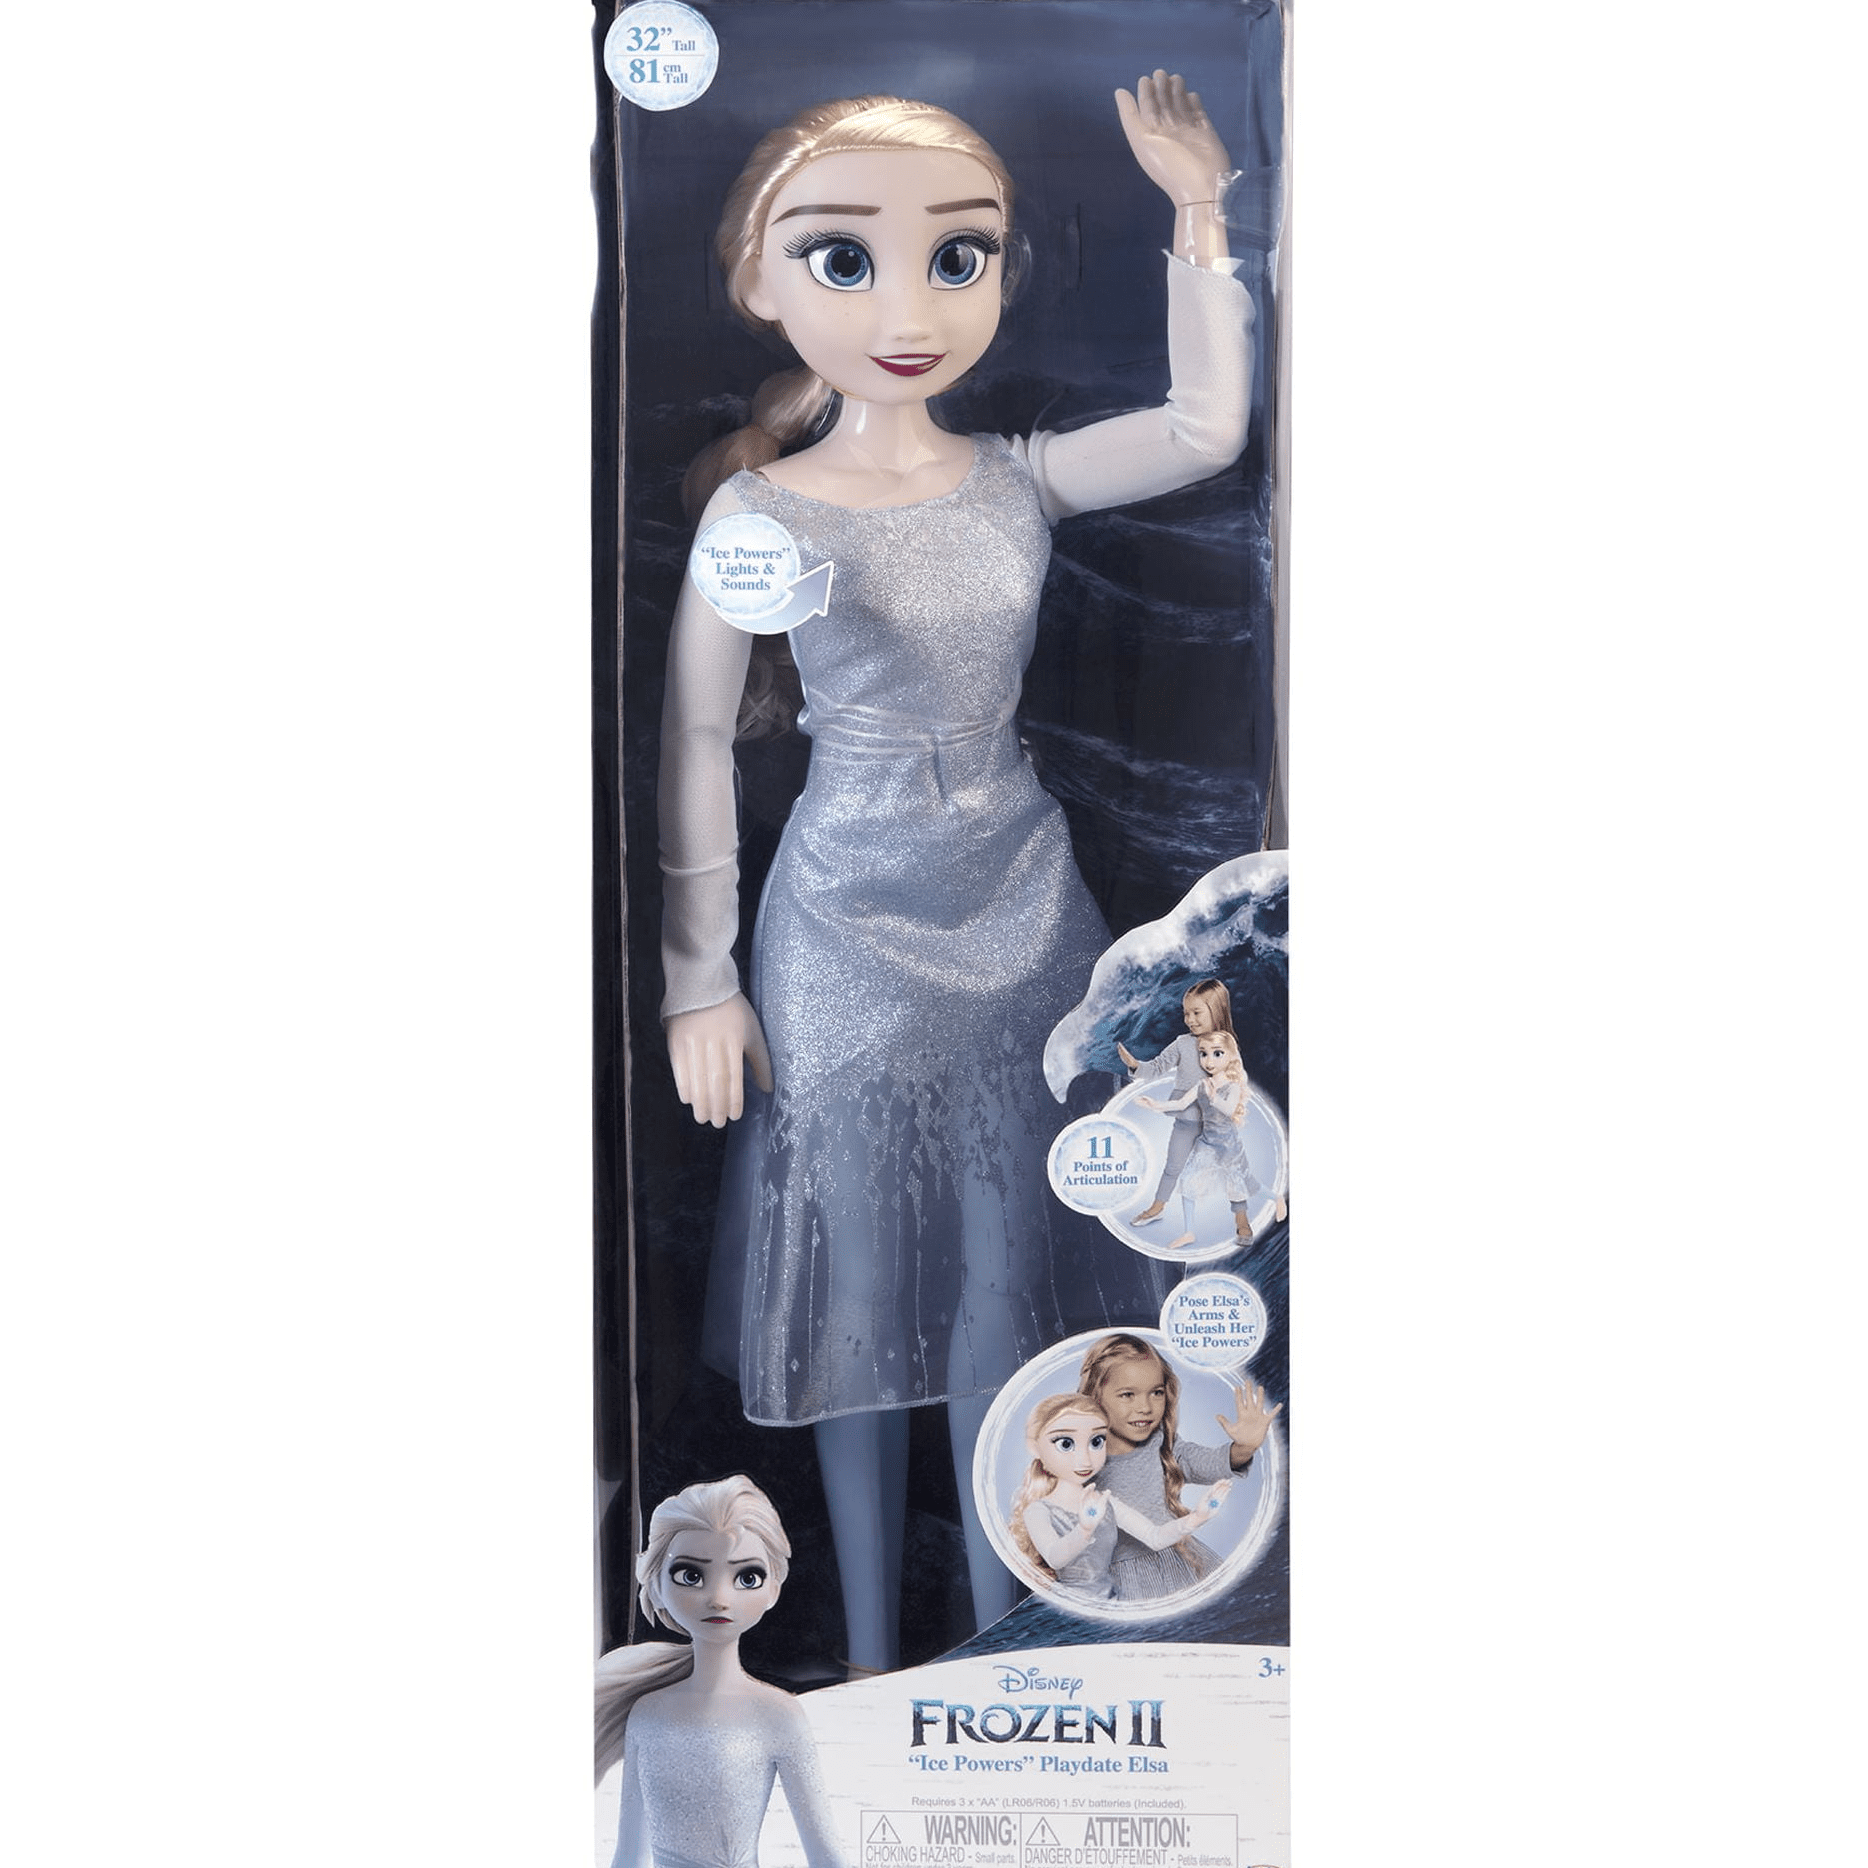 Disney Frozen 32 inch Playdate Elsa Doll with Ice Powers 